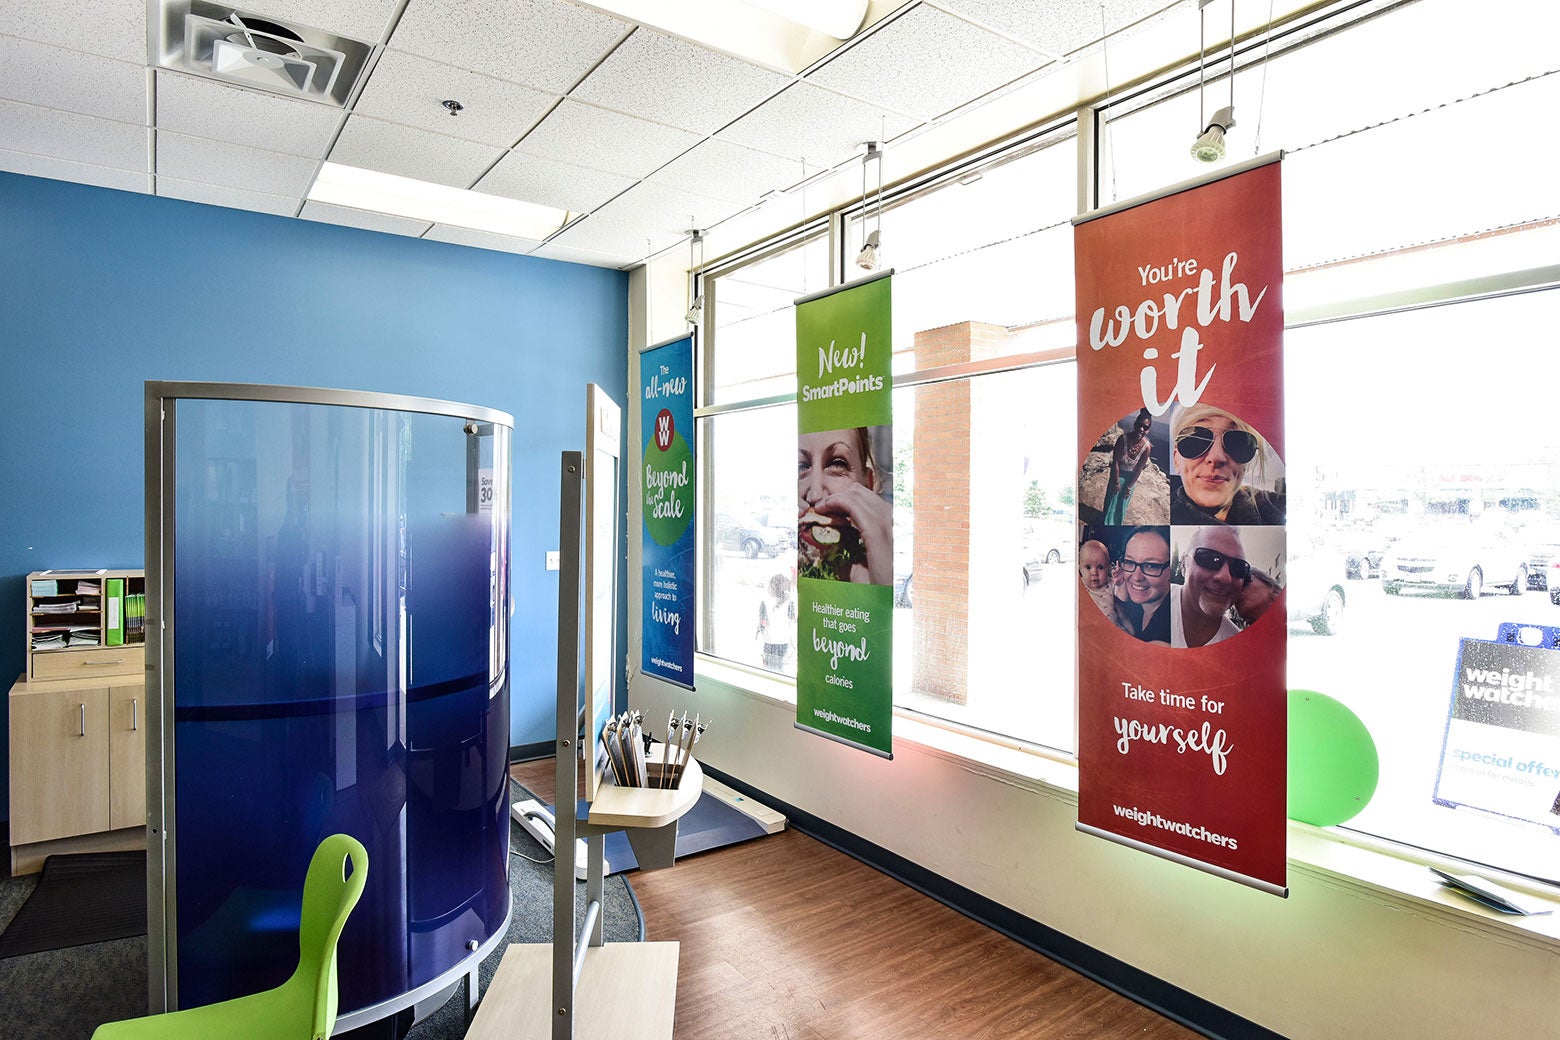 Signs like "You're worth it!" are displayed in a WeightWatchers meeting room.